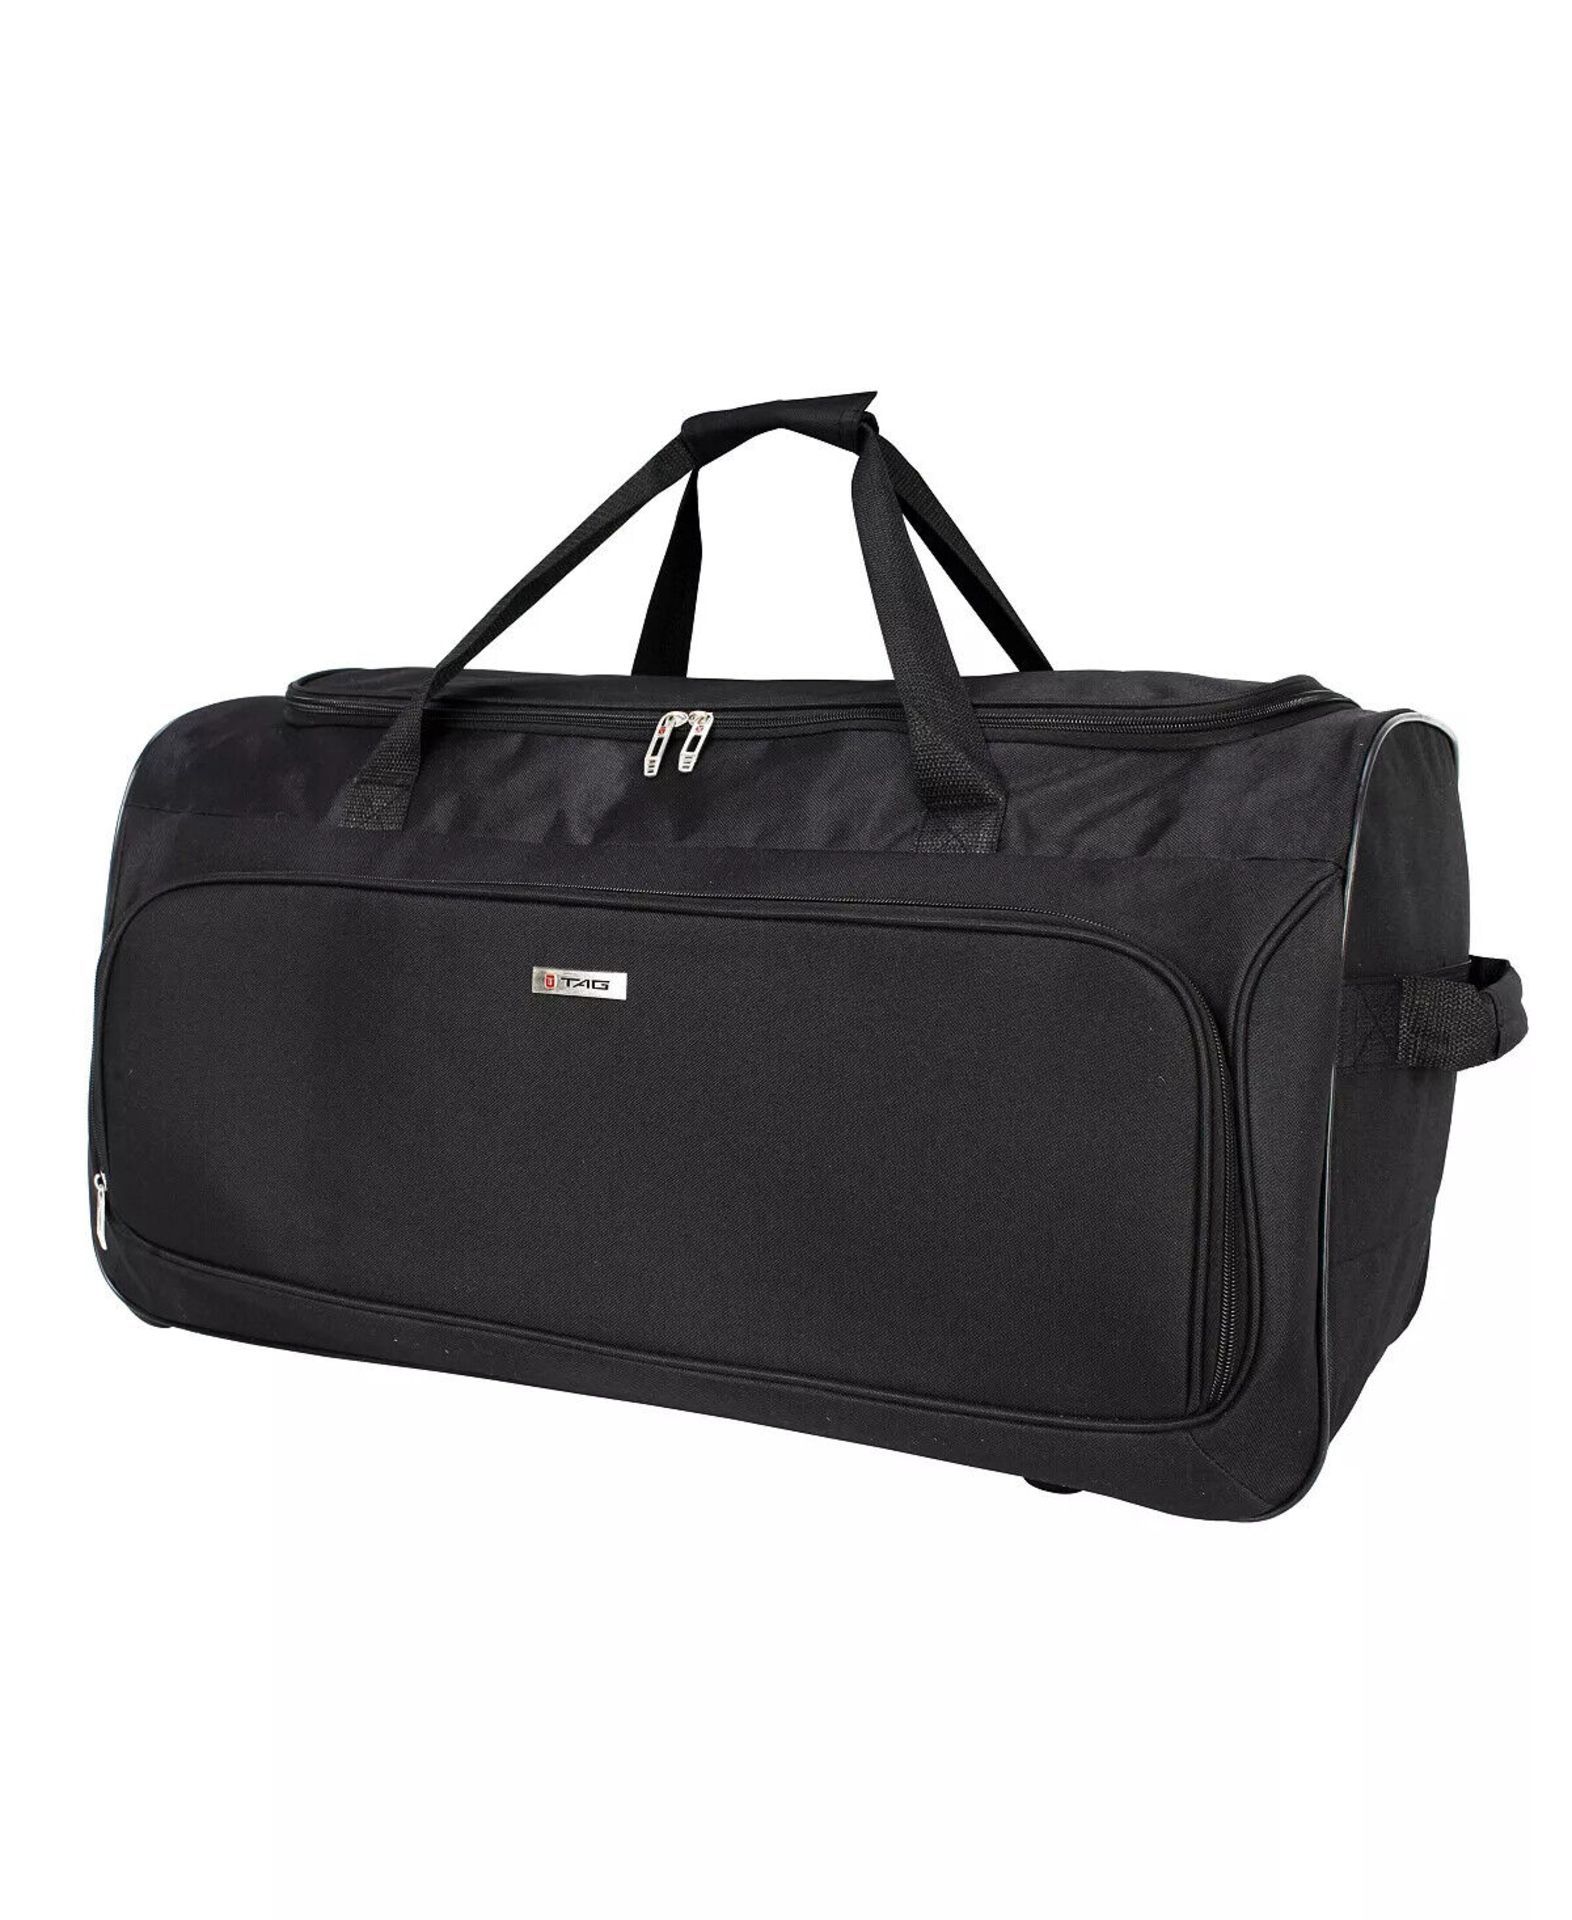 3 X NEW SETS OF TAG Ridgefield Black 5 Piece Softside Luggage Sets. RRP $300 per set, giving this - Image 2 of 4